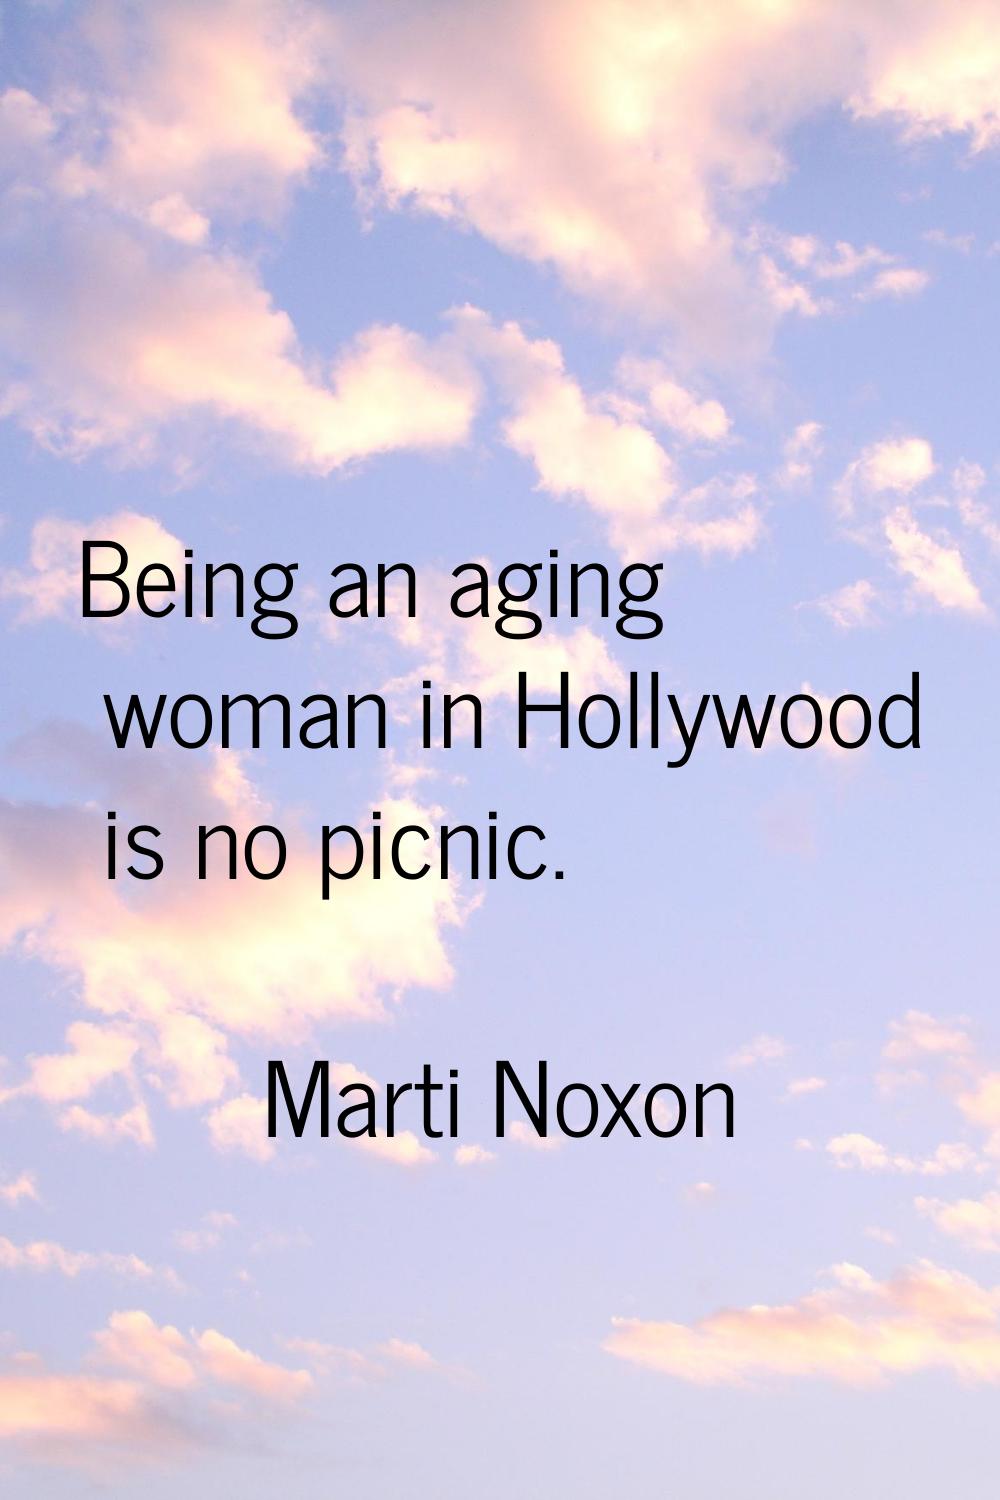 Being an aging woman in Hollywood is no picnic.